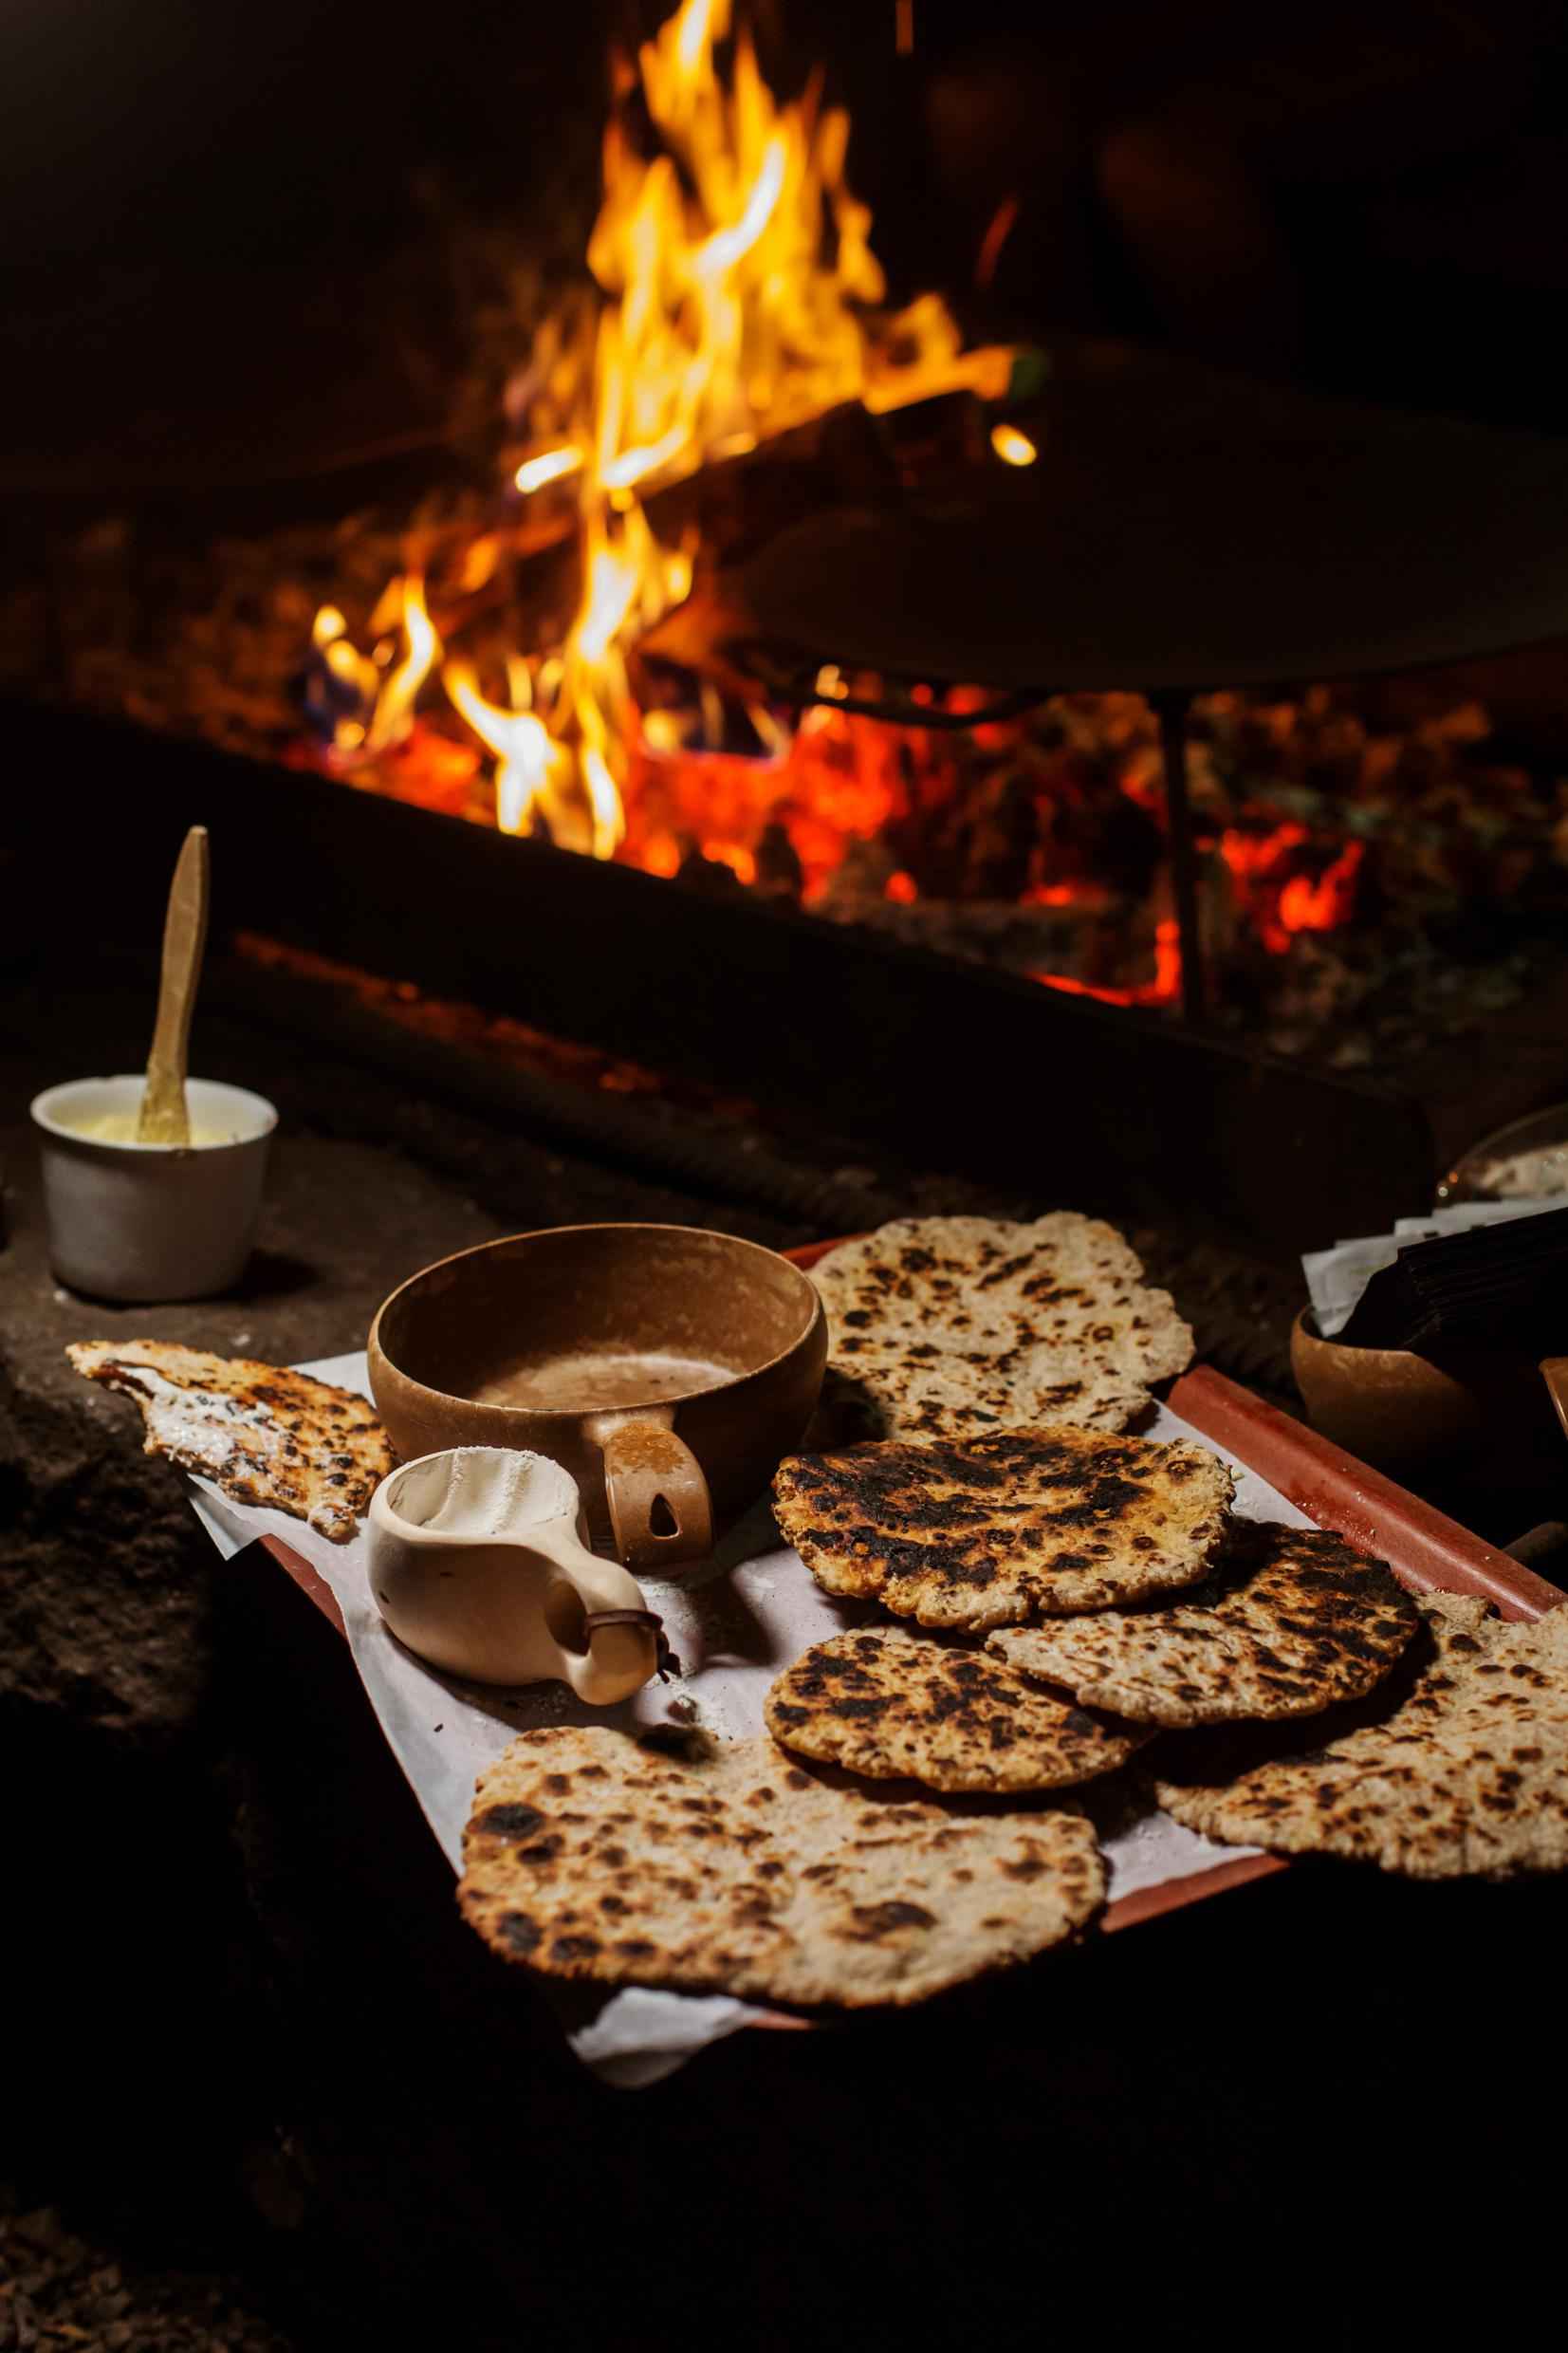 A tray with freshly baked flatbread and two wooden cups. A jar of butter next to the tray, and a campfire behind it.